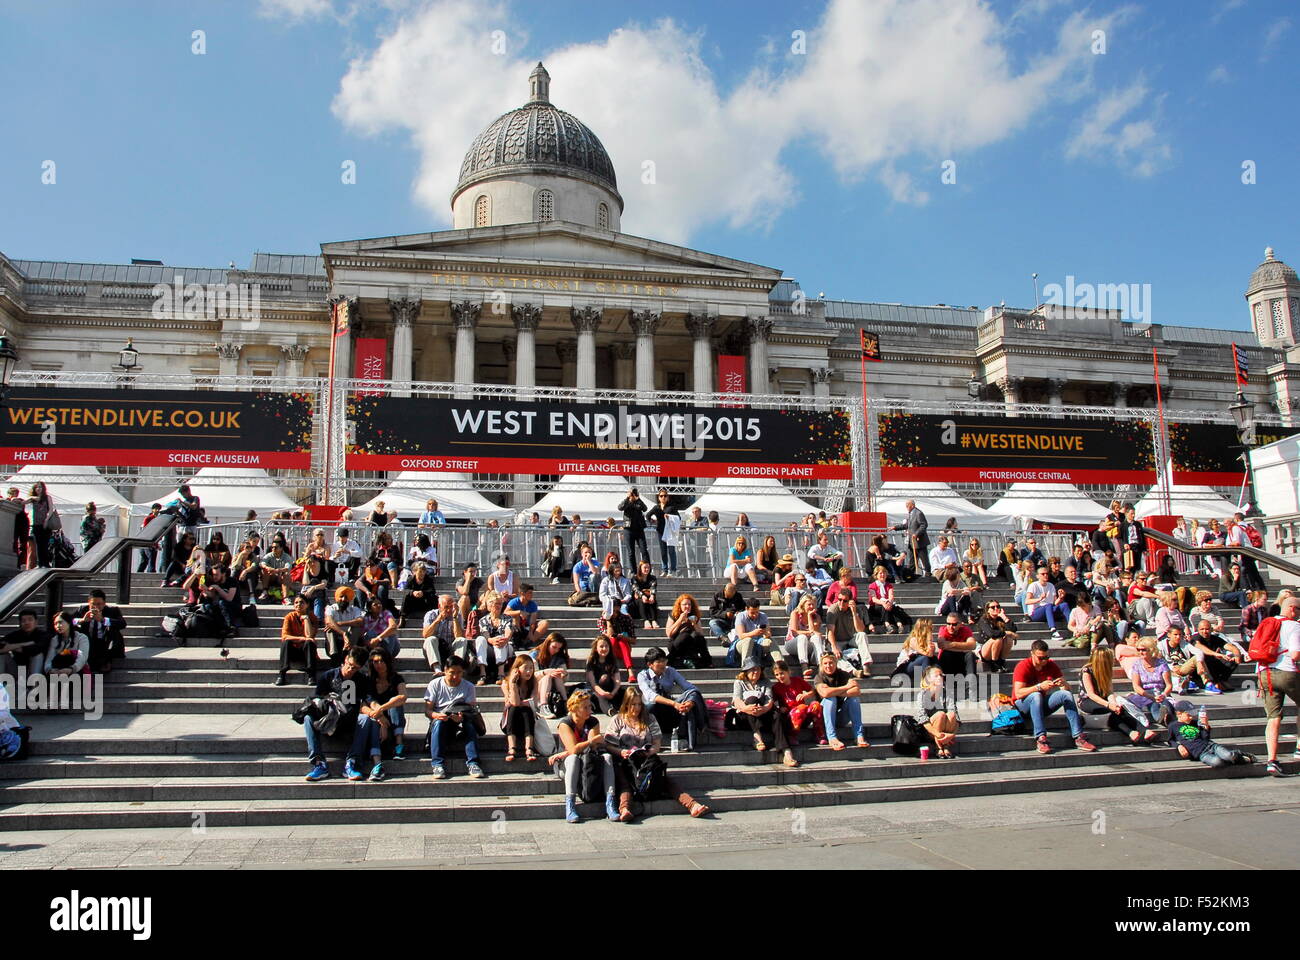 The West End Live 2015 crown in front of the National Gallery in London, England, UK Stock Photo